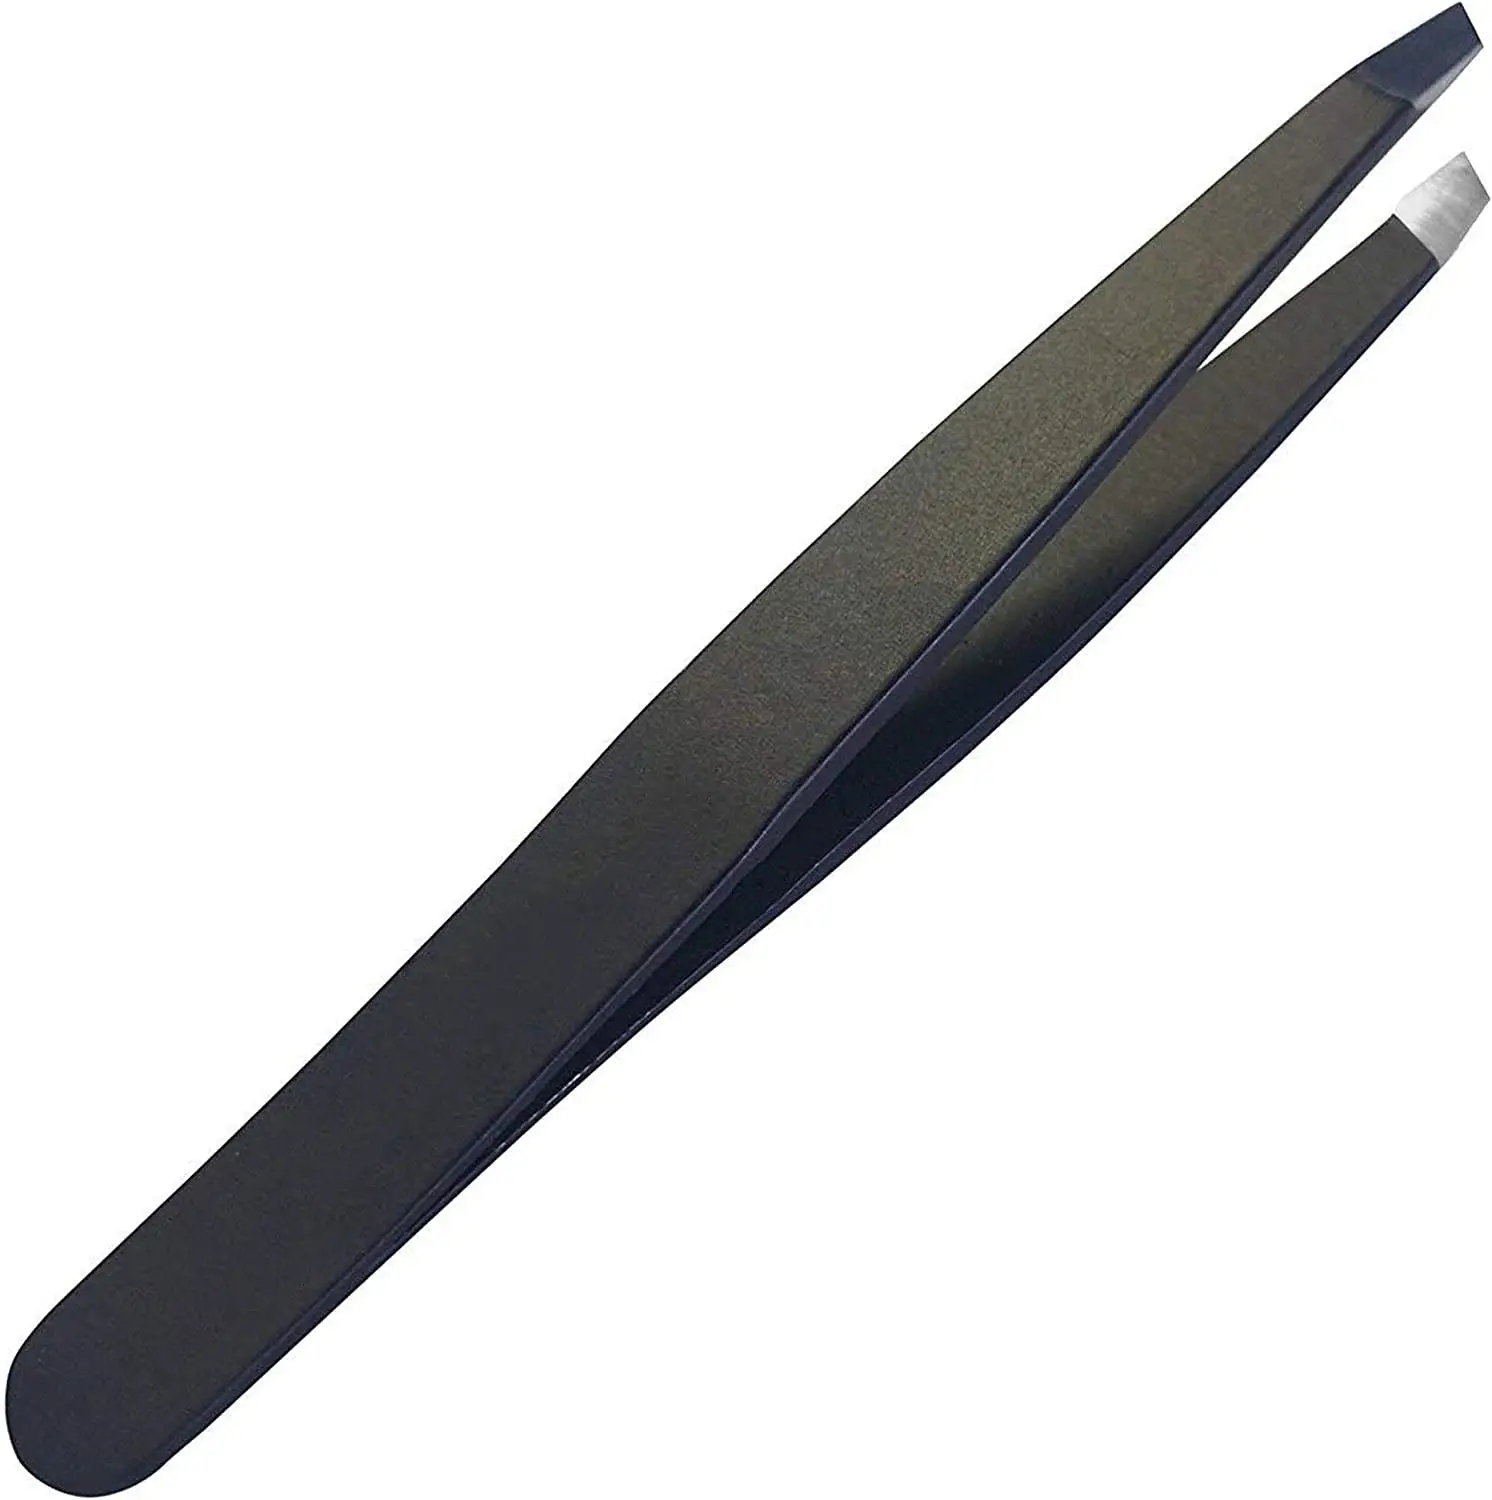 Pointed Tweezers for blackheads